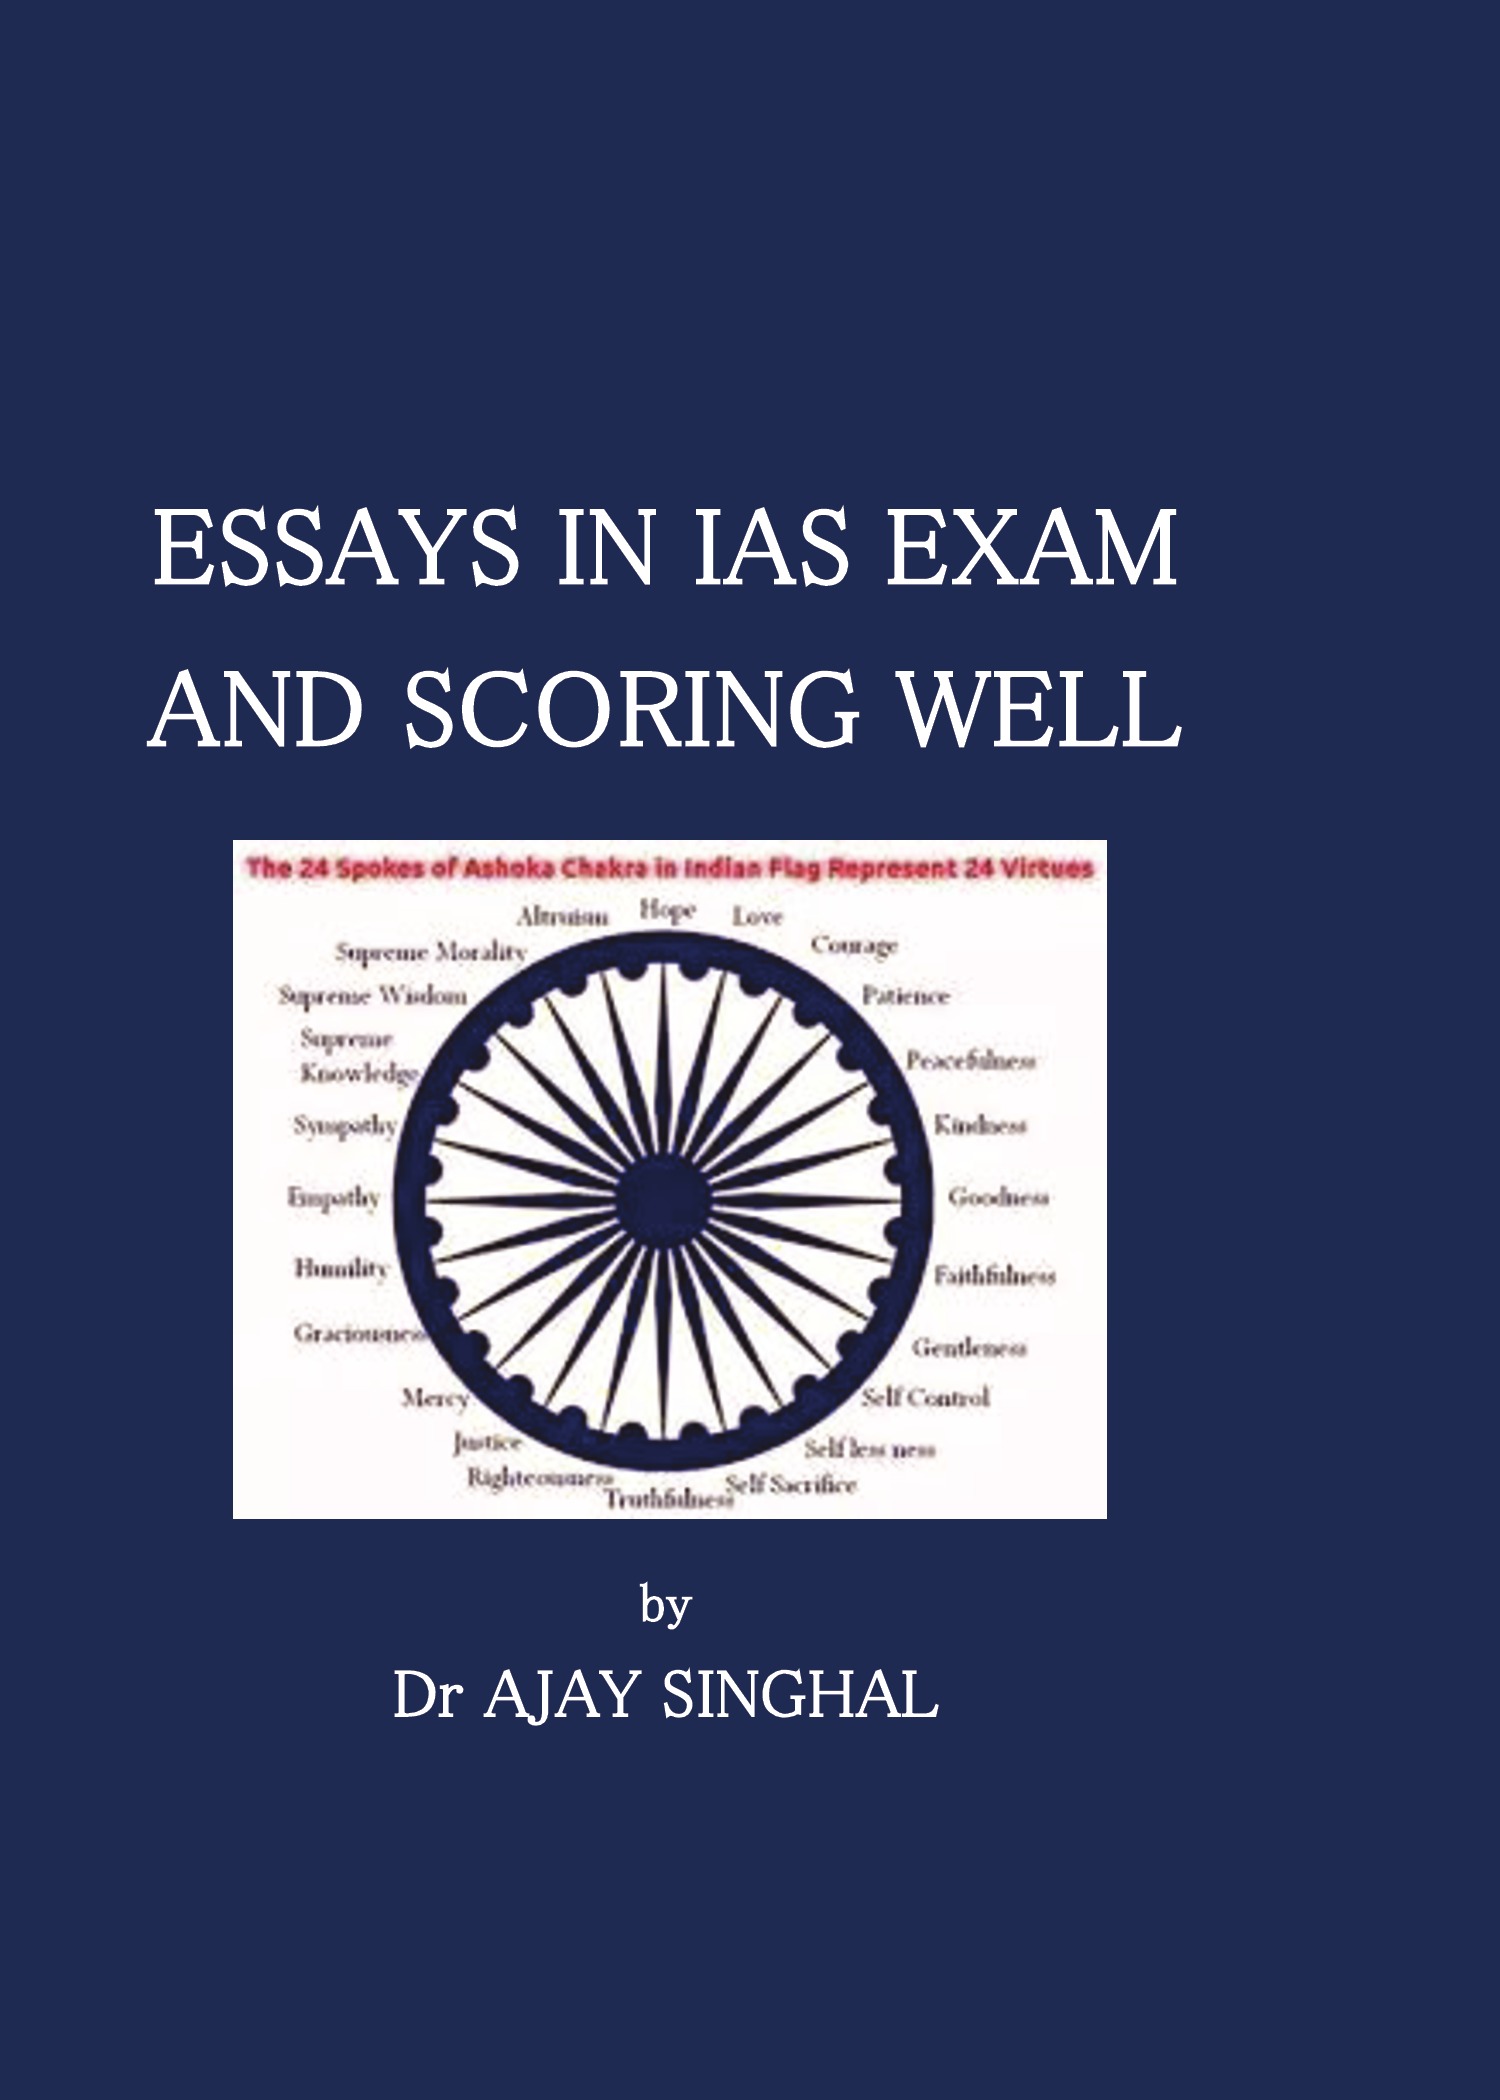 which type of essay comes in ias exam